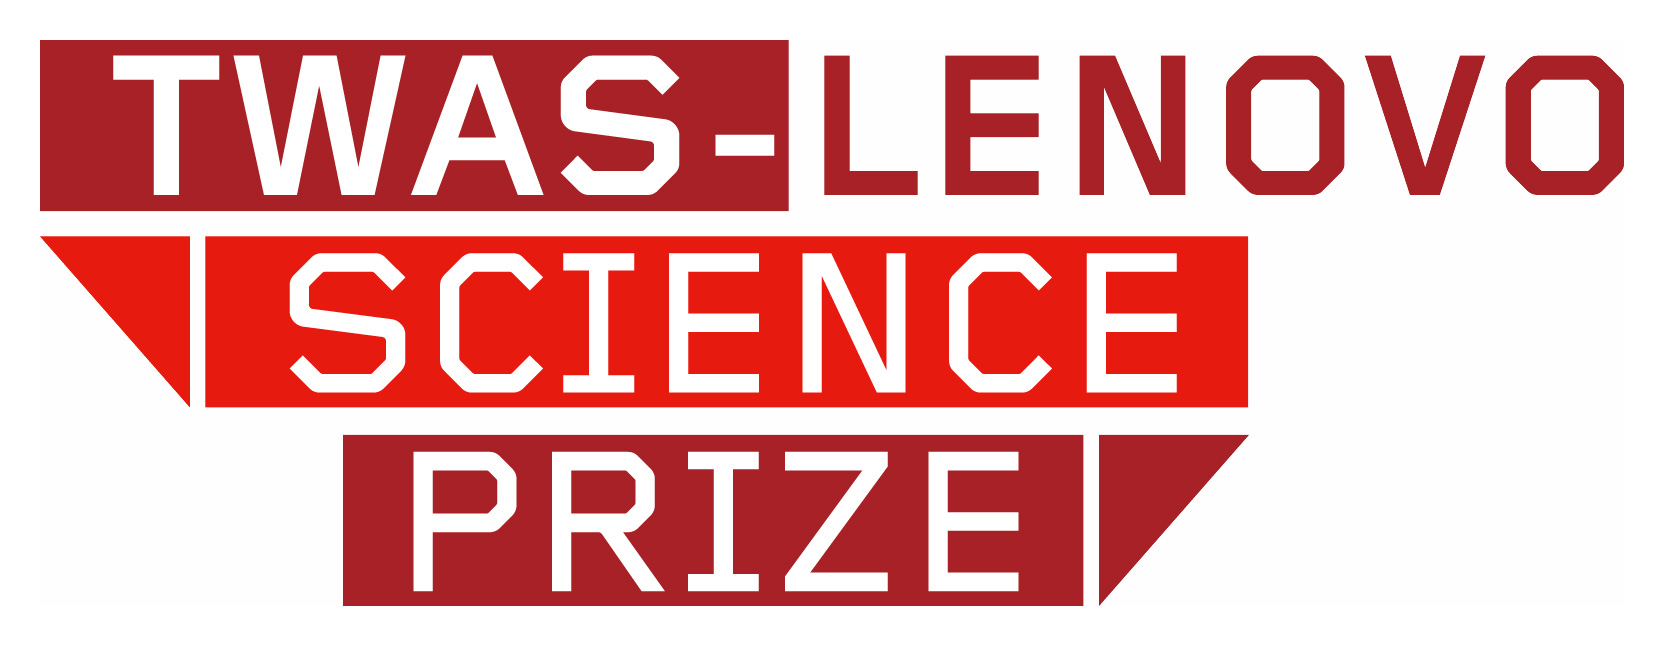 TWAS-Lenovo Science Prize in Geological Sciences 2017